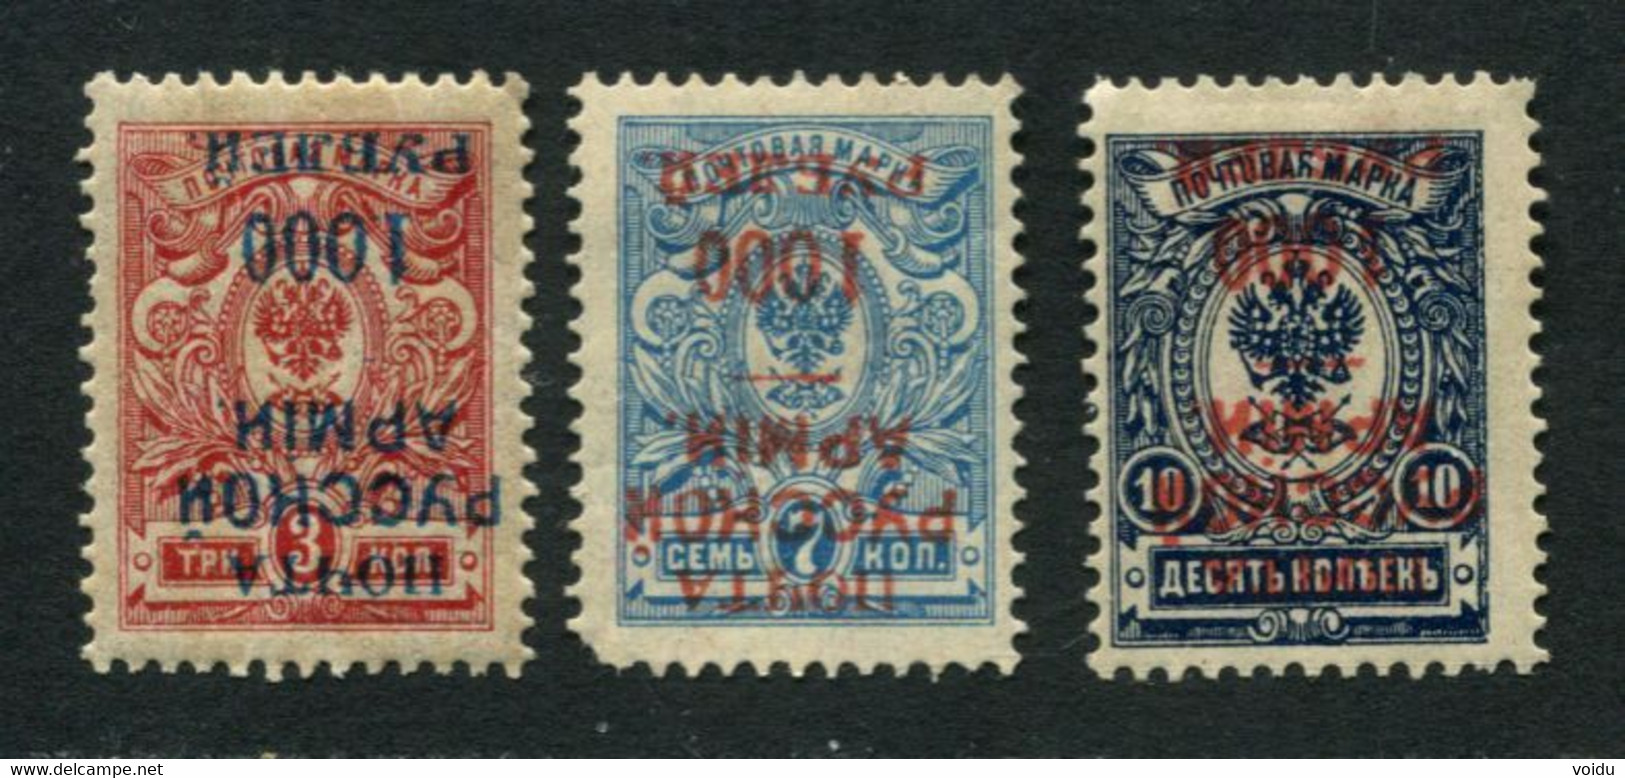 Russia 1920 Wrangel Army.  MH*  Inverted Overprints - Wrangel Army